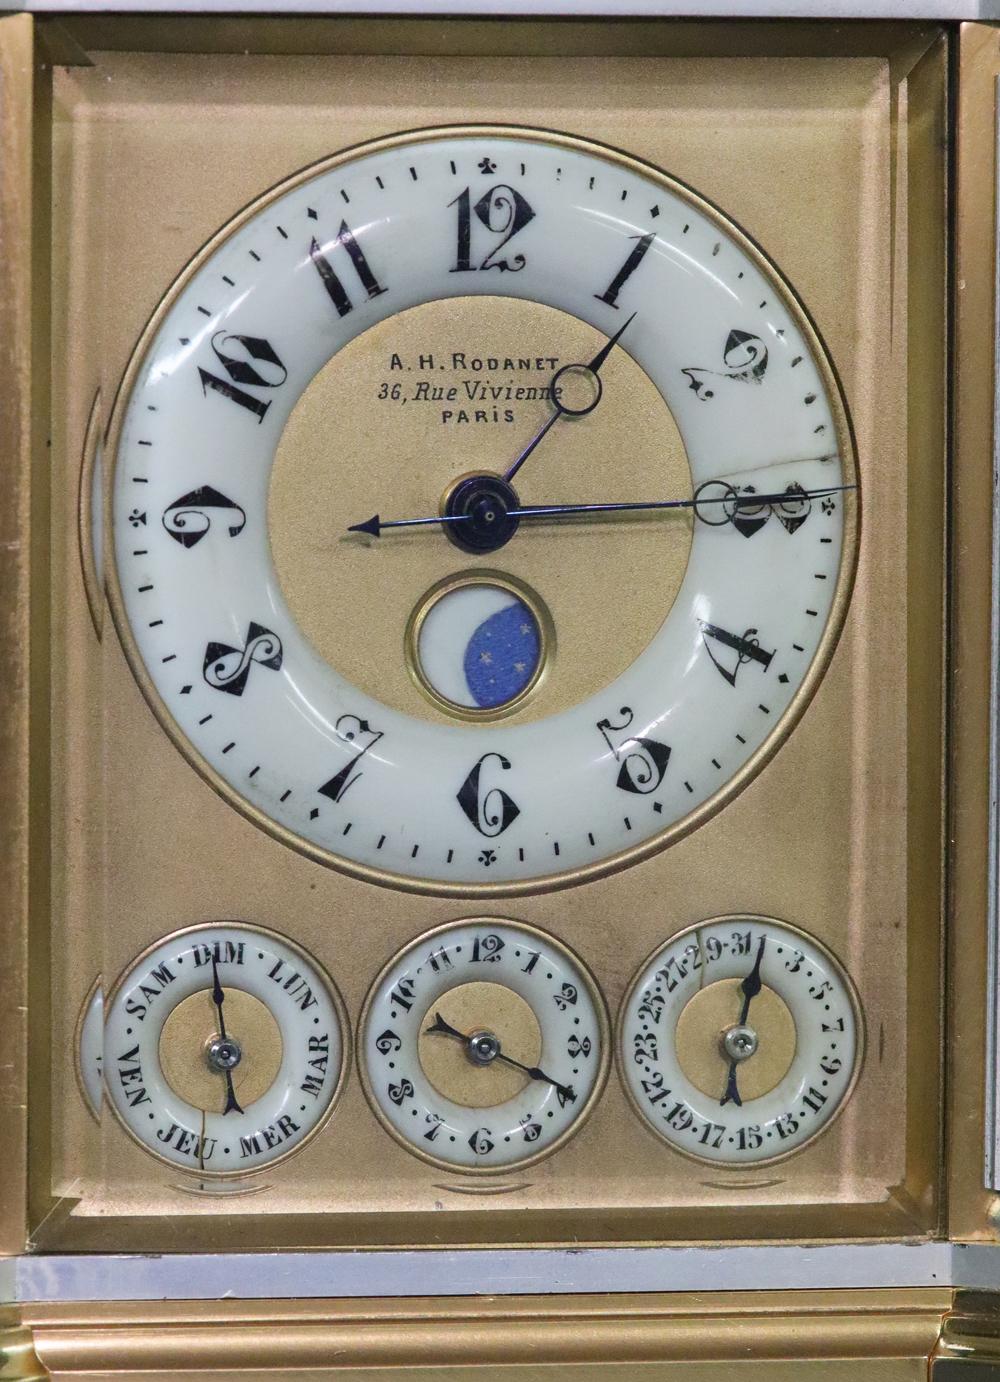 20th Century c.1895 French Carriage Clock with Complications by Rodanet